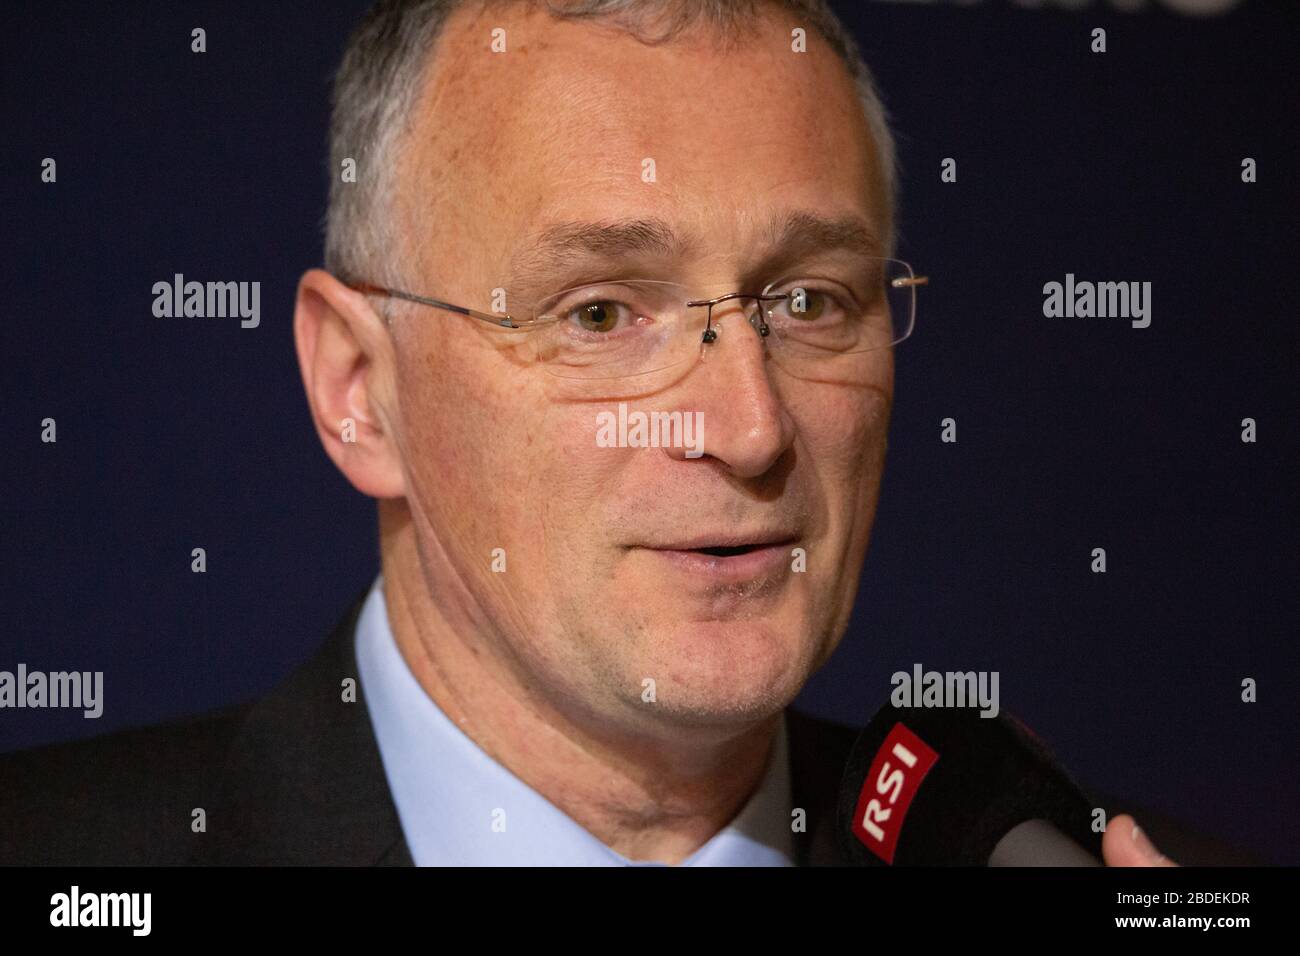 Italian-american expert in nano-medicine Mauro Ferrari photographed during the World Economic Forum in Davos. Mauro Ferrari resigned unexpectedly as President of the European Research Council on Wednesday April 8th 2020, citing an uncoordinated response to the COVID-19 pandemy. Stock Photo